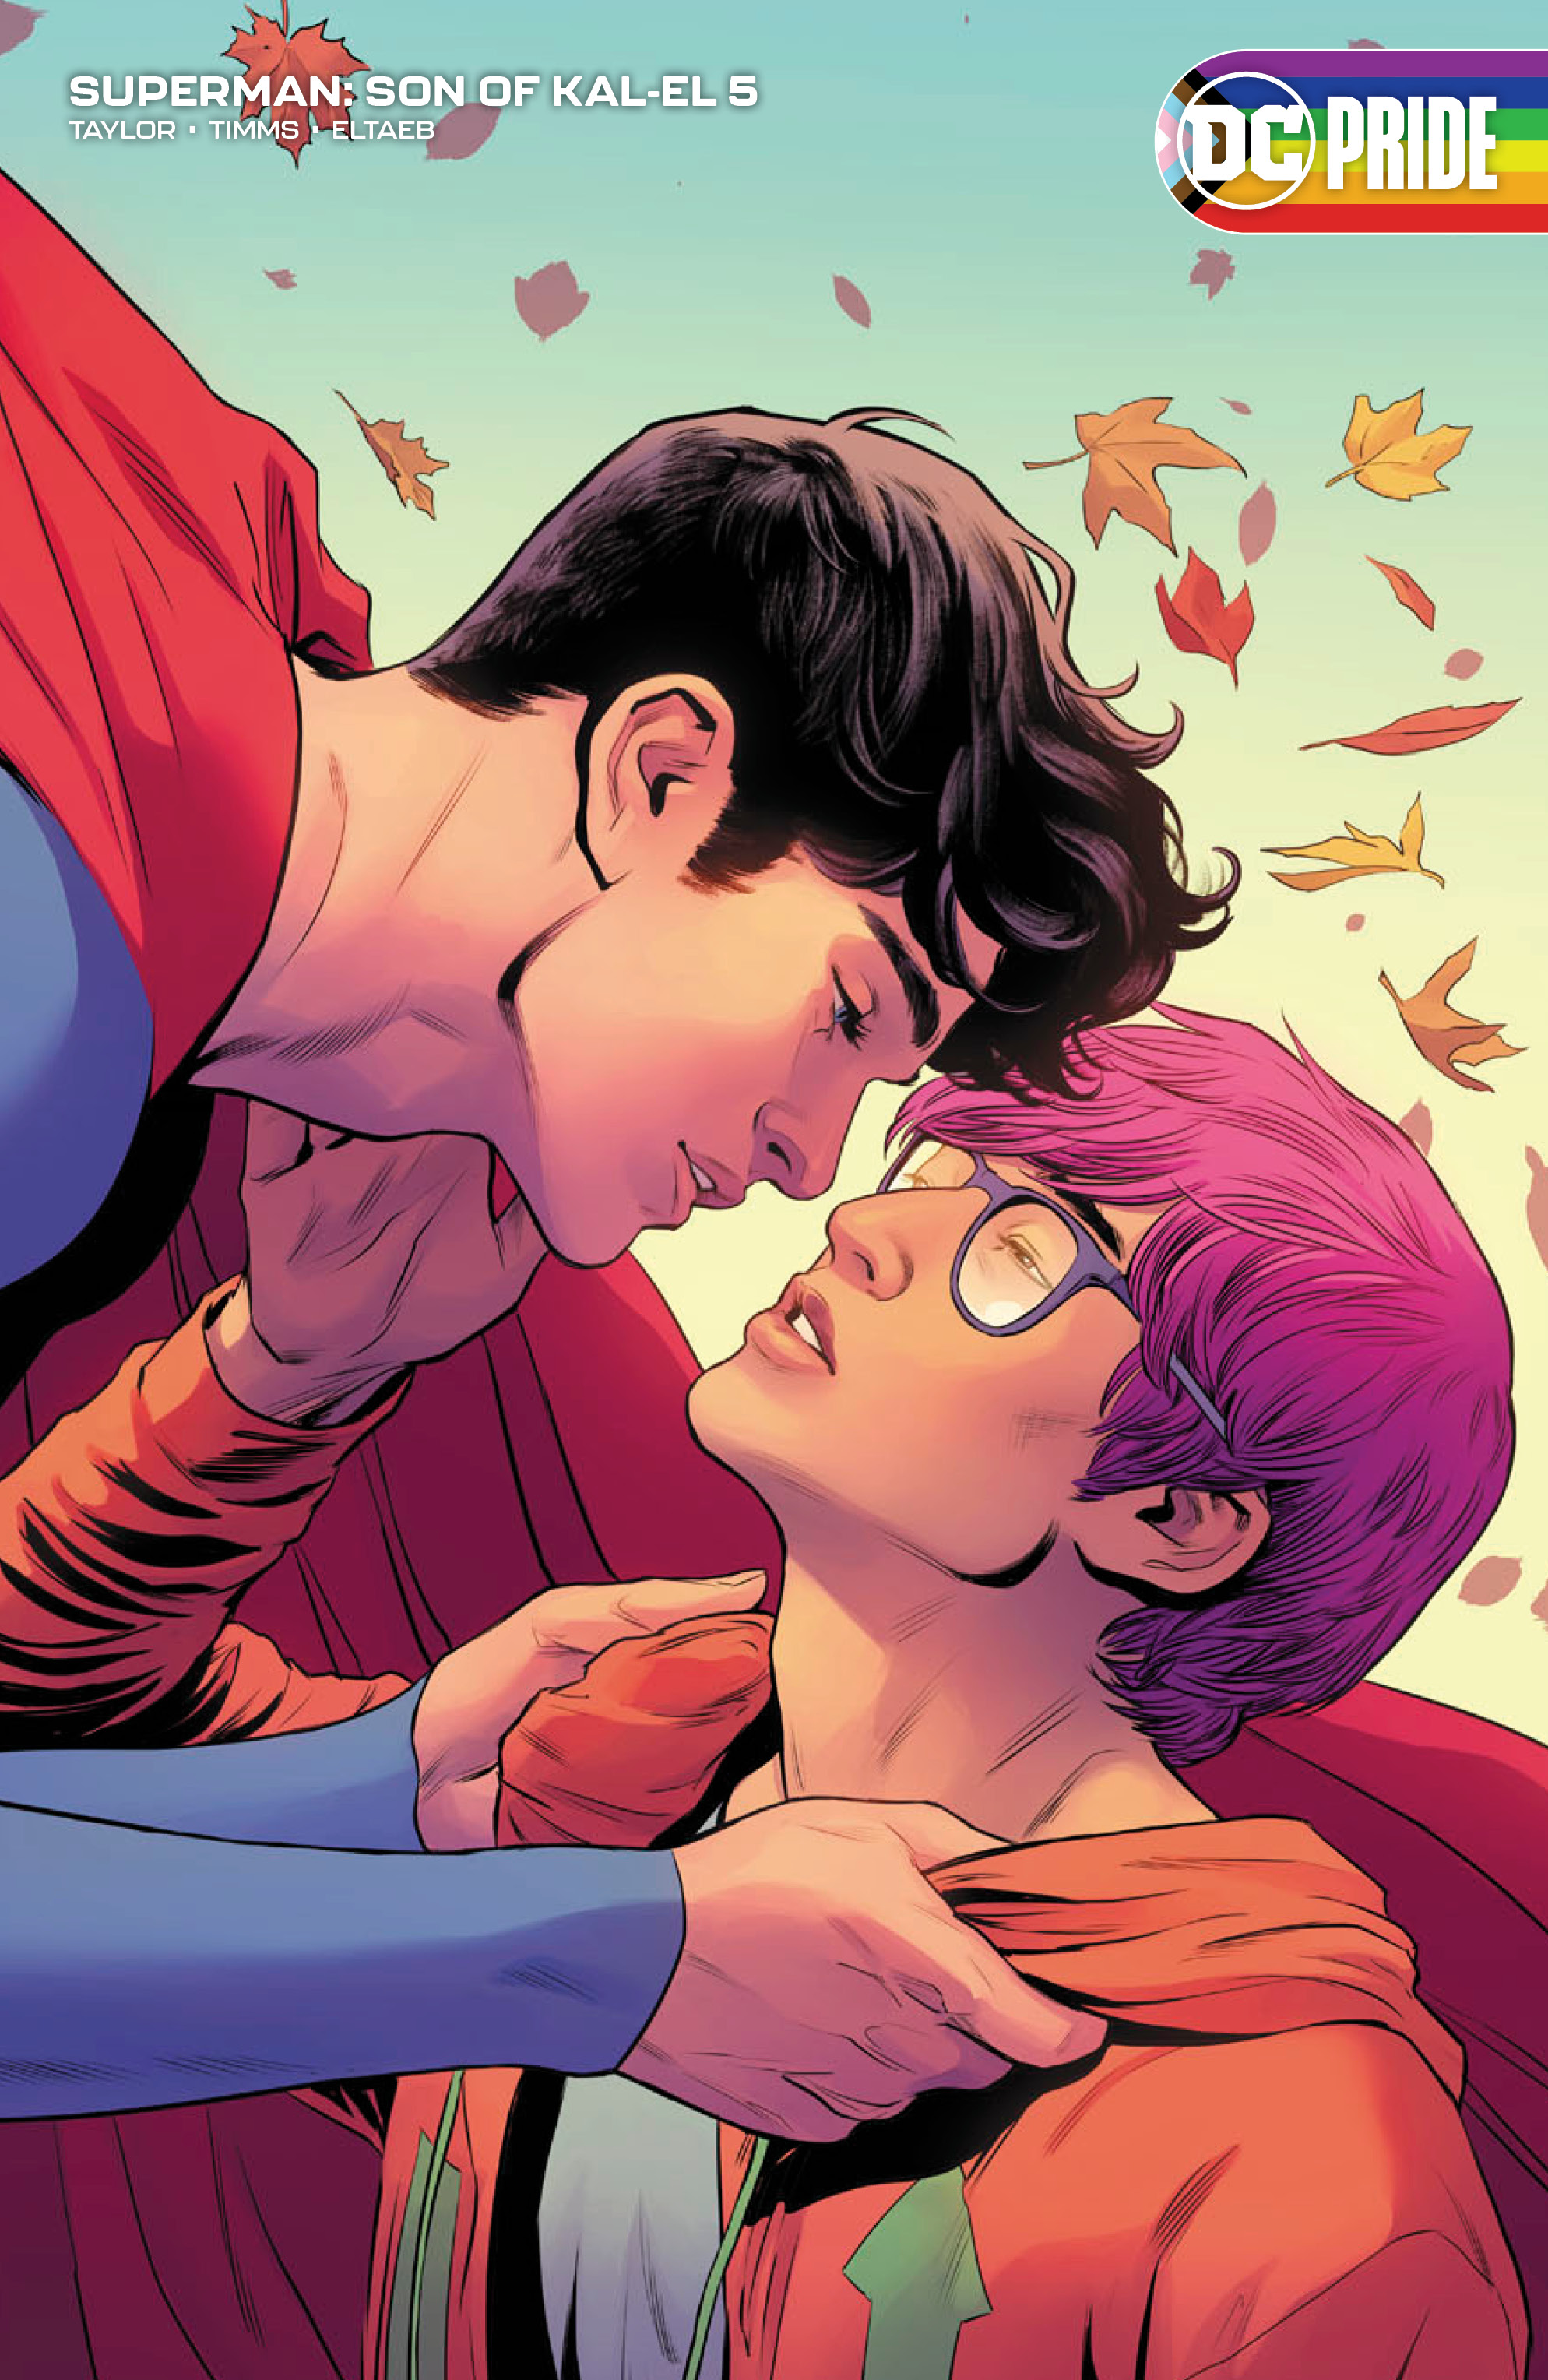 The new DC Superman comes out as bisexual | GamesRadar+